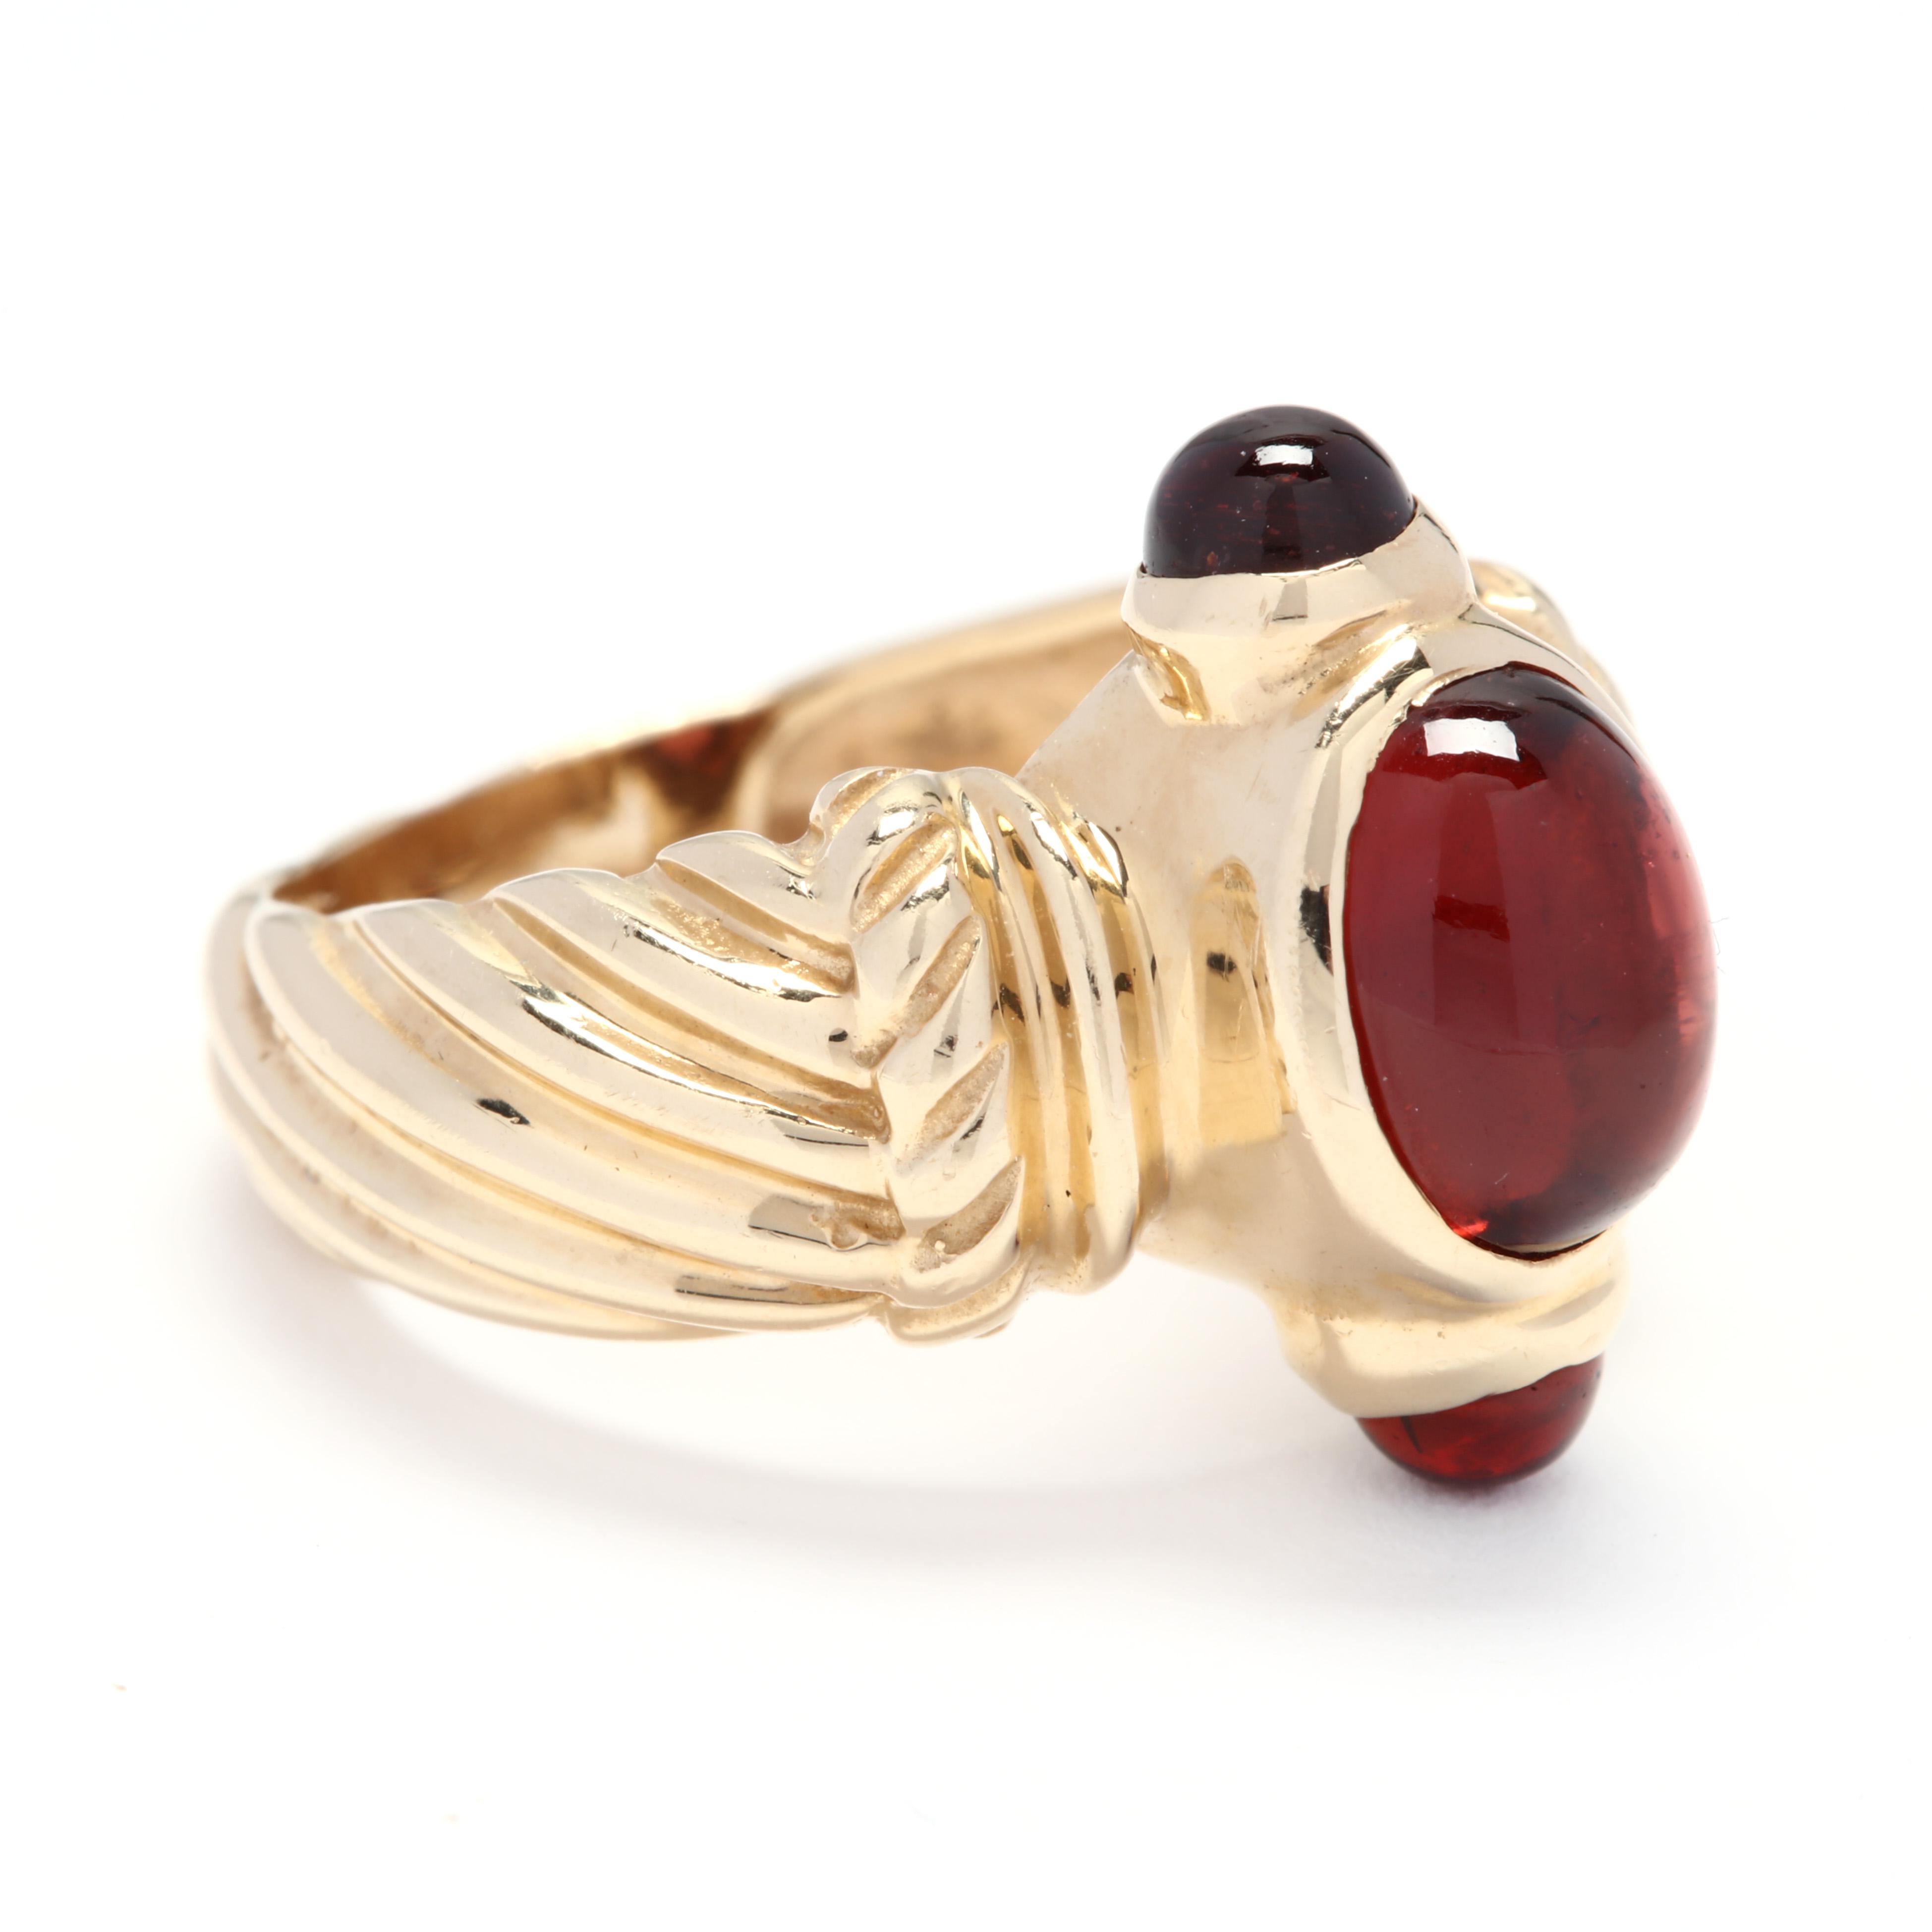 A 14 karat yellow gold and garnet cable ring. Centered on a bezel set, oval cabochon garnet stone with a bezel set, round cabochon garnet on each side of the profile and a tapered, cable motif shank. 

Stones:
- garnets, 3 stones
- oval cabochon
-